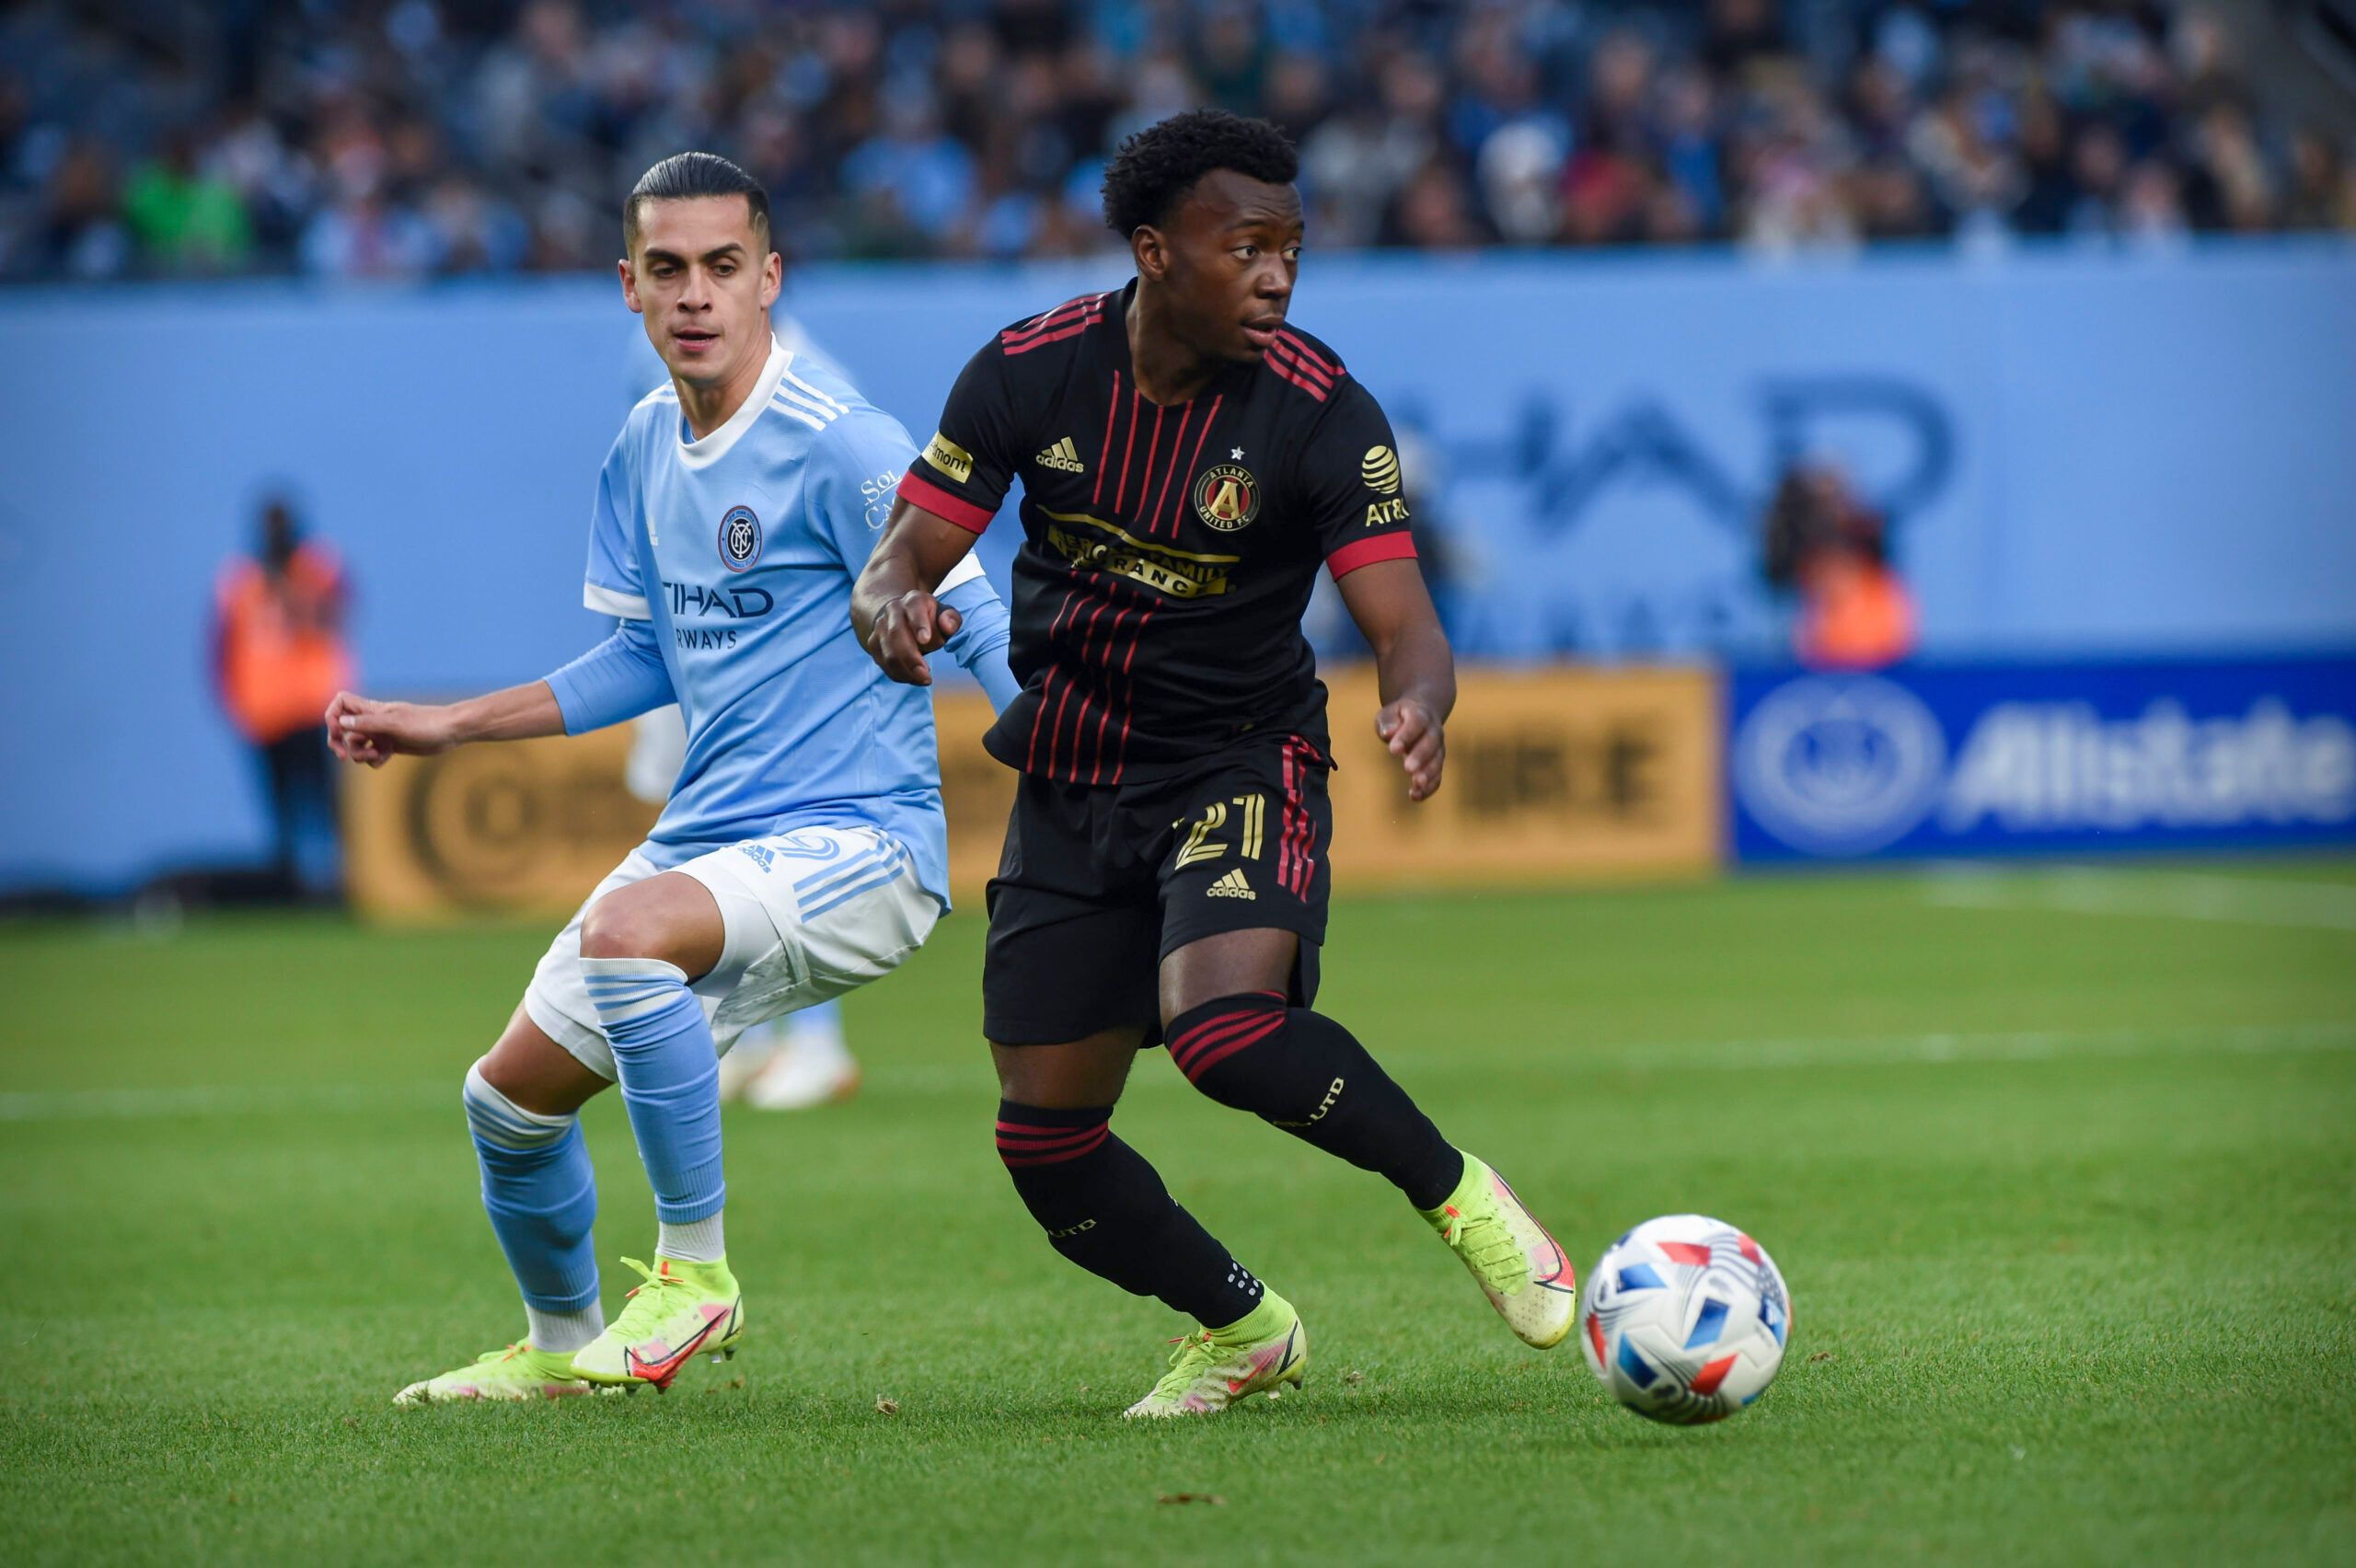 Nov 21, 2021; Bronx, NY, USA; Atlanta United defender George Bello (21) moves the ball past New York City FC forward Heber (9) during the first half in a round one MLS Playoff game at Yankee Stadium. Mandatory Credit: Jonathan Jones-USA TODAY Sports